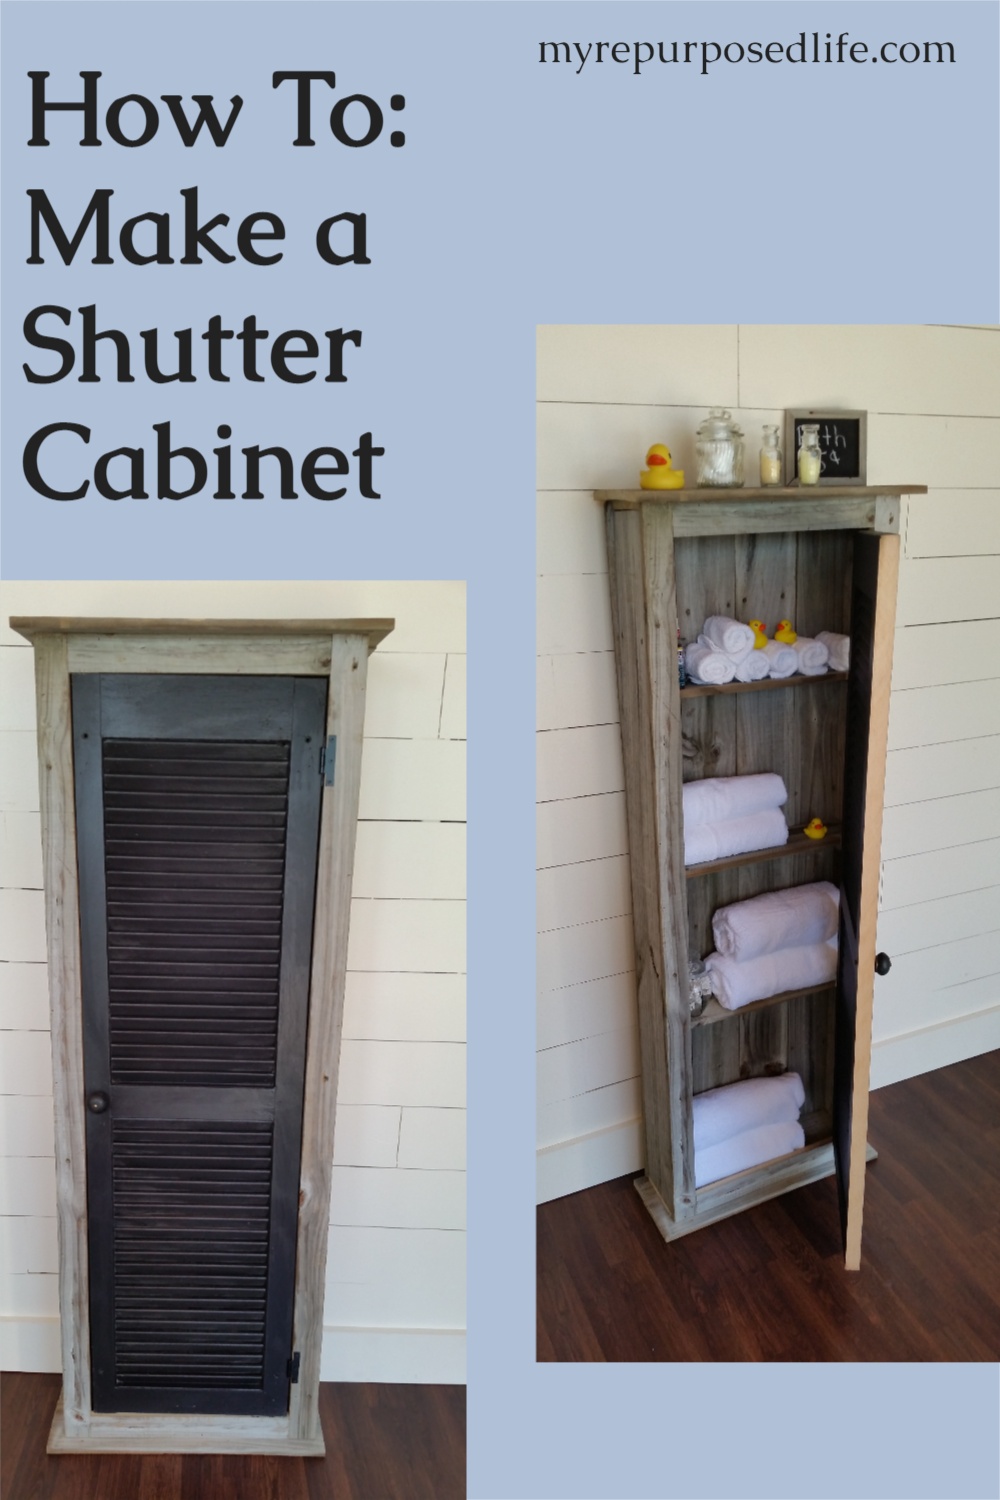 How to make a rustic shutter cabinet using an old shutter and reclaimed wood. Step by step directions so you can Do It Yourself. This cabinet is perfect for a small bathroom, guestroom, or mudroom. Put in in the kitchen for extra pantry storage. #MyRepurposedLife #Repurposed #upcycled #shutter via @repurposedlife